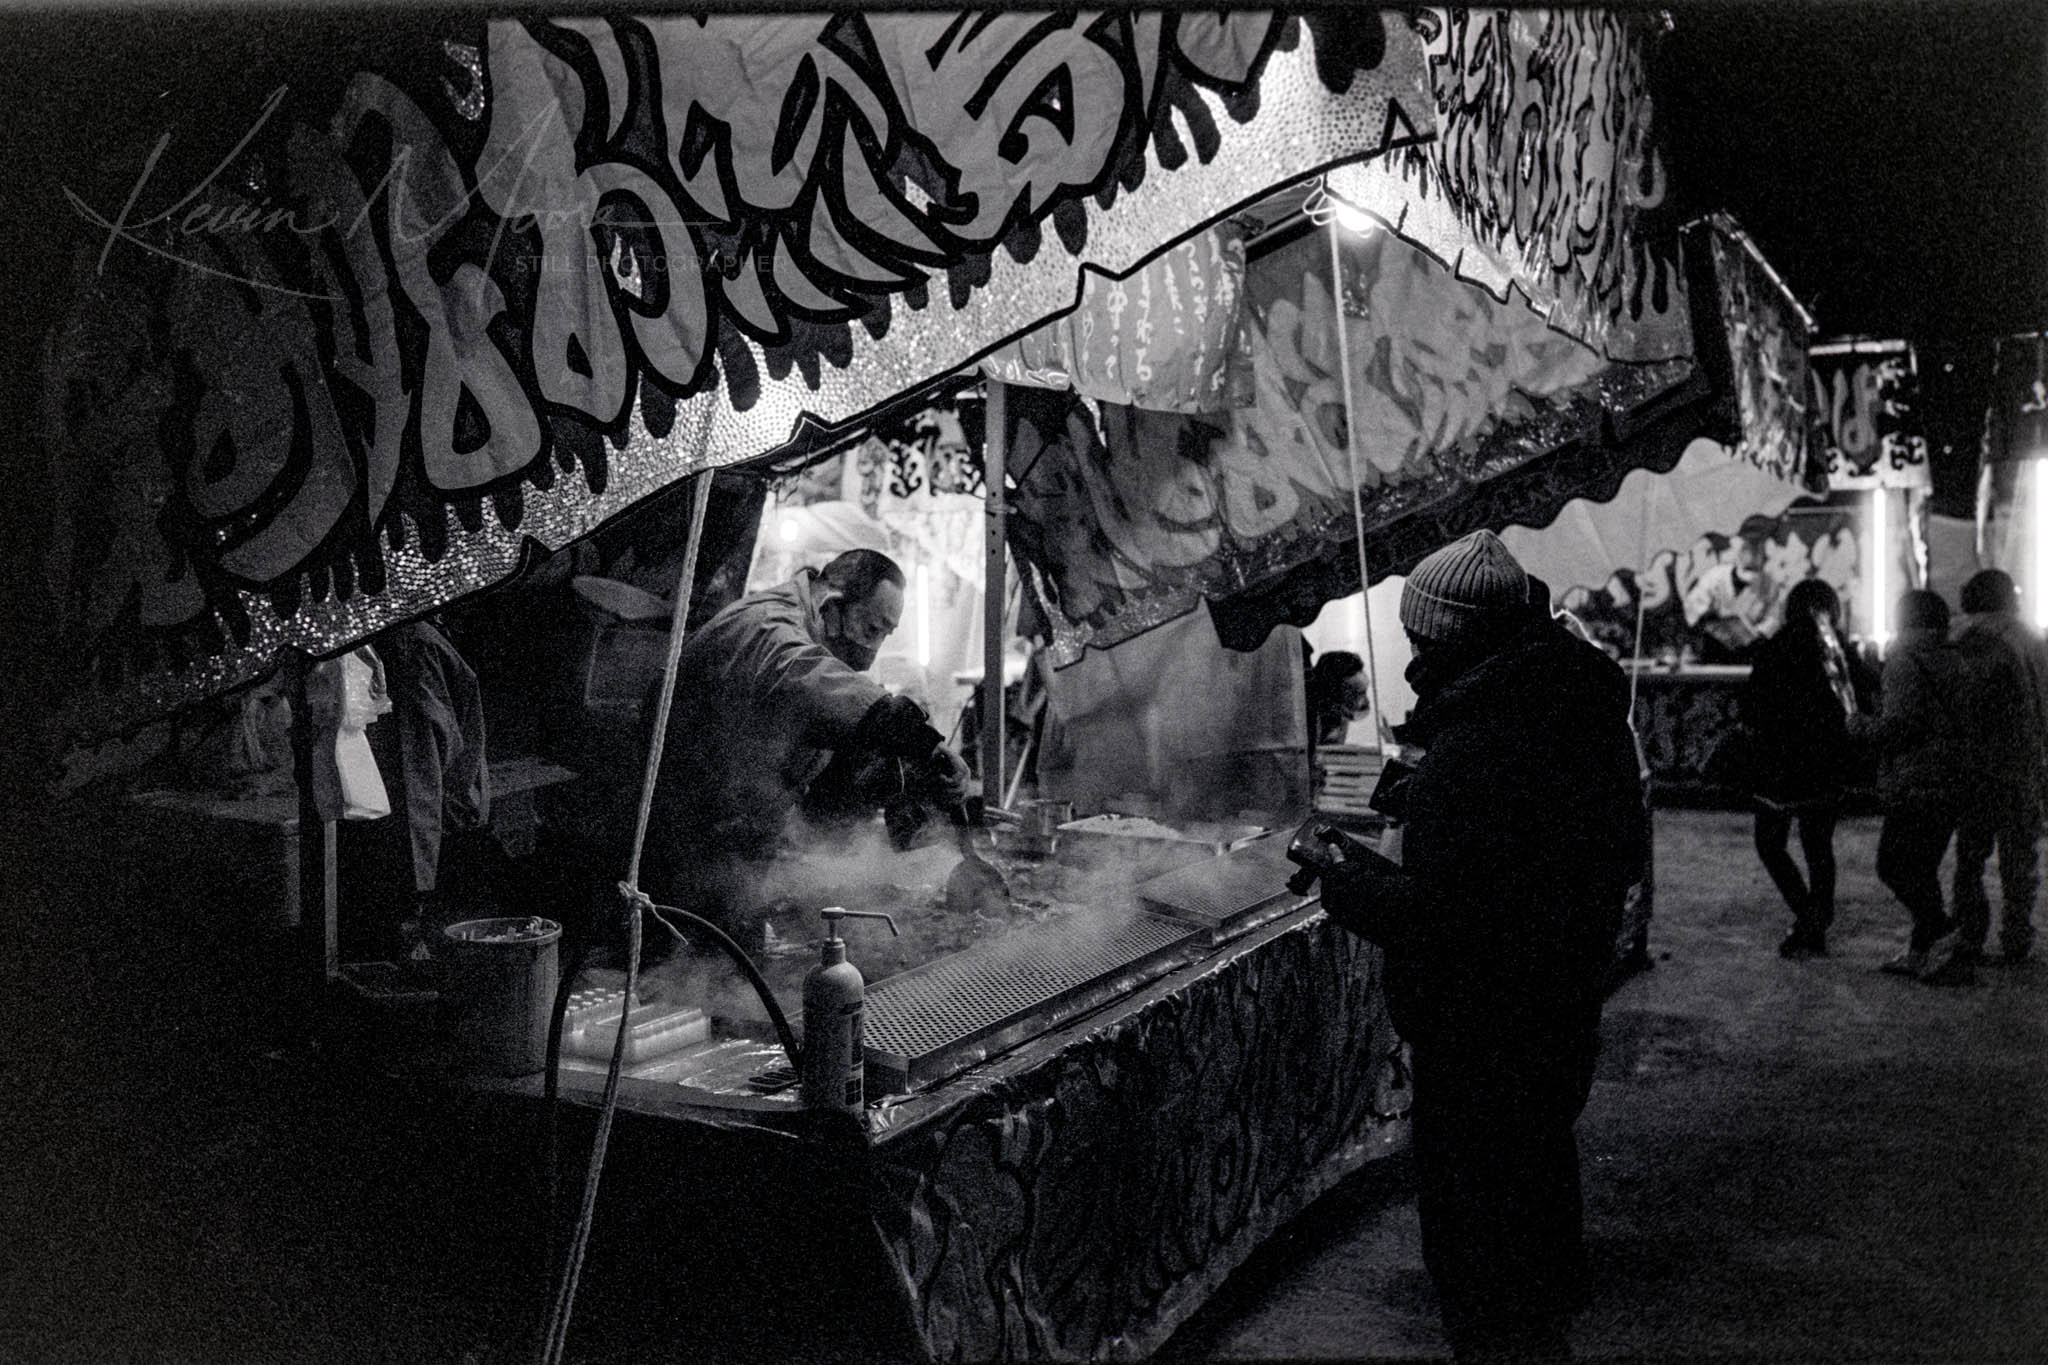 Bustling night market scene in Japan with illuminated, intricately adorned stall and smokey ambiance in black and white.